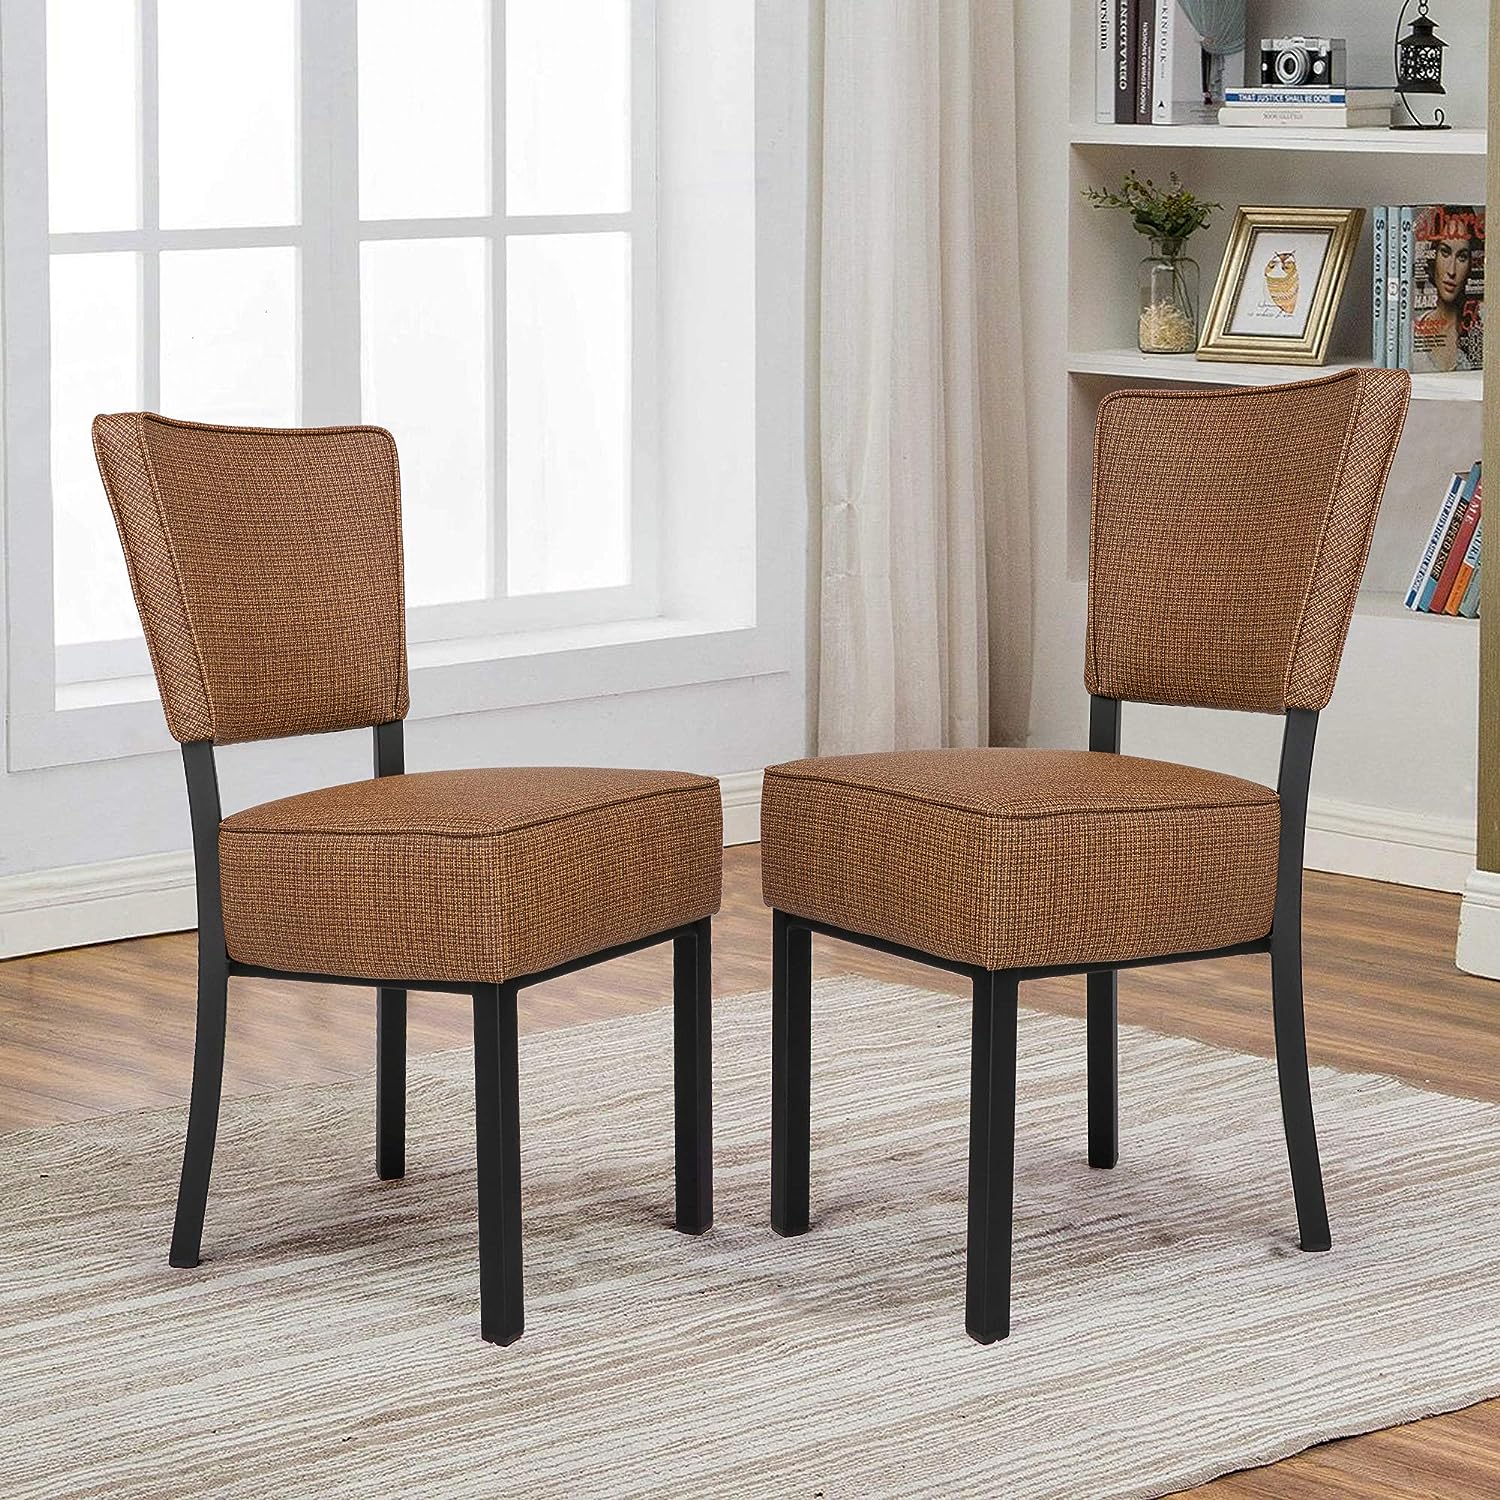 LUCKYERMORE Set of 2 Kitchen Dining Chairs PU Leather Side Chairs with Soft Cushion, Brown